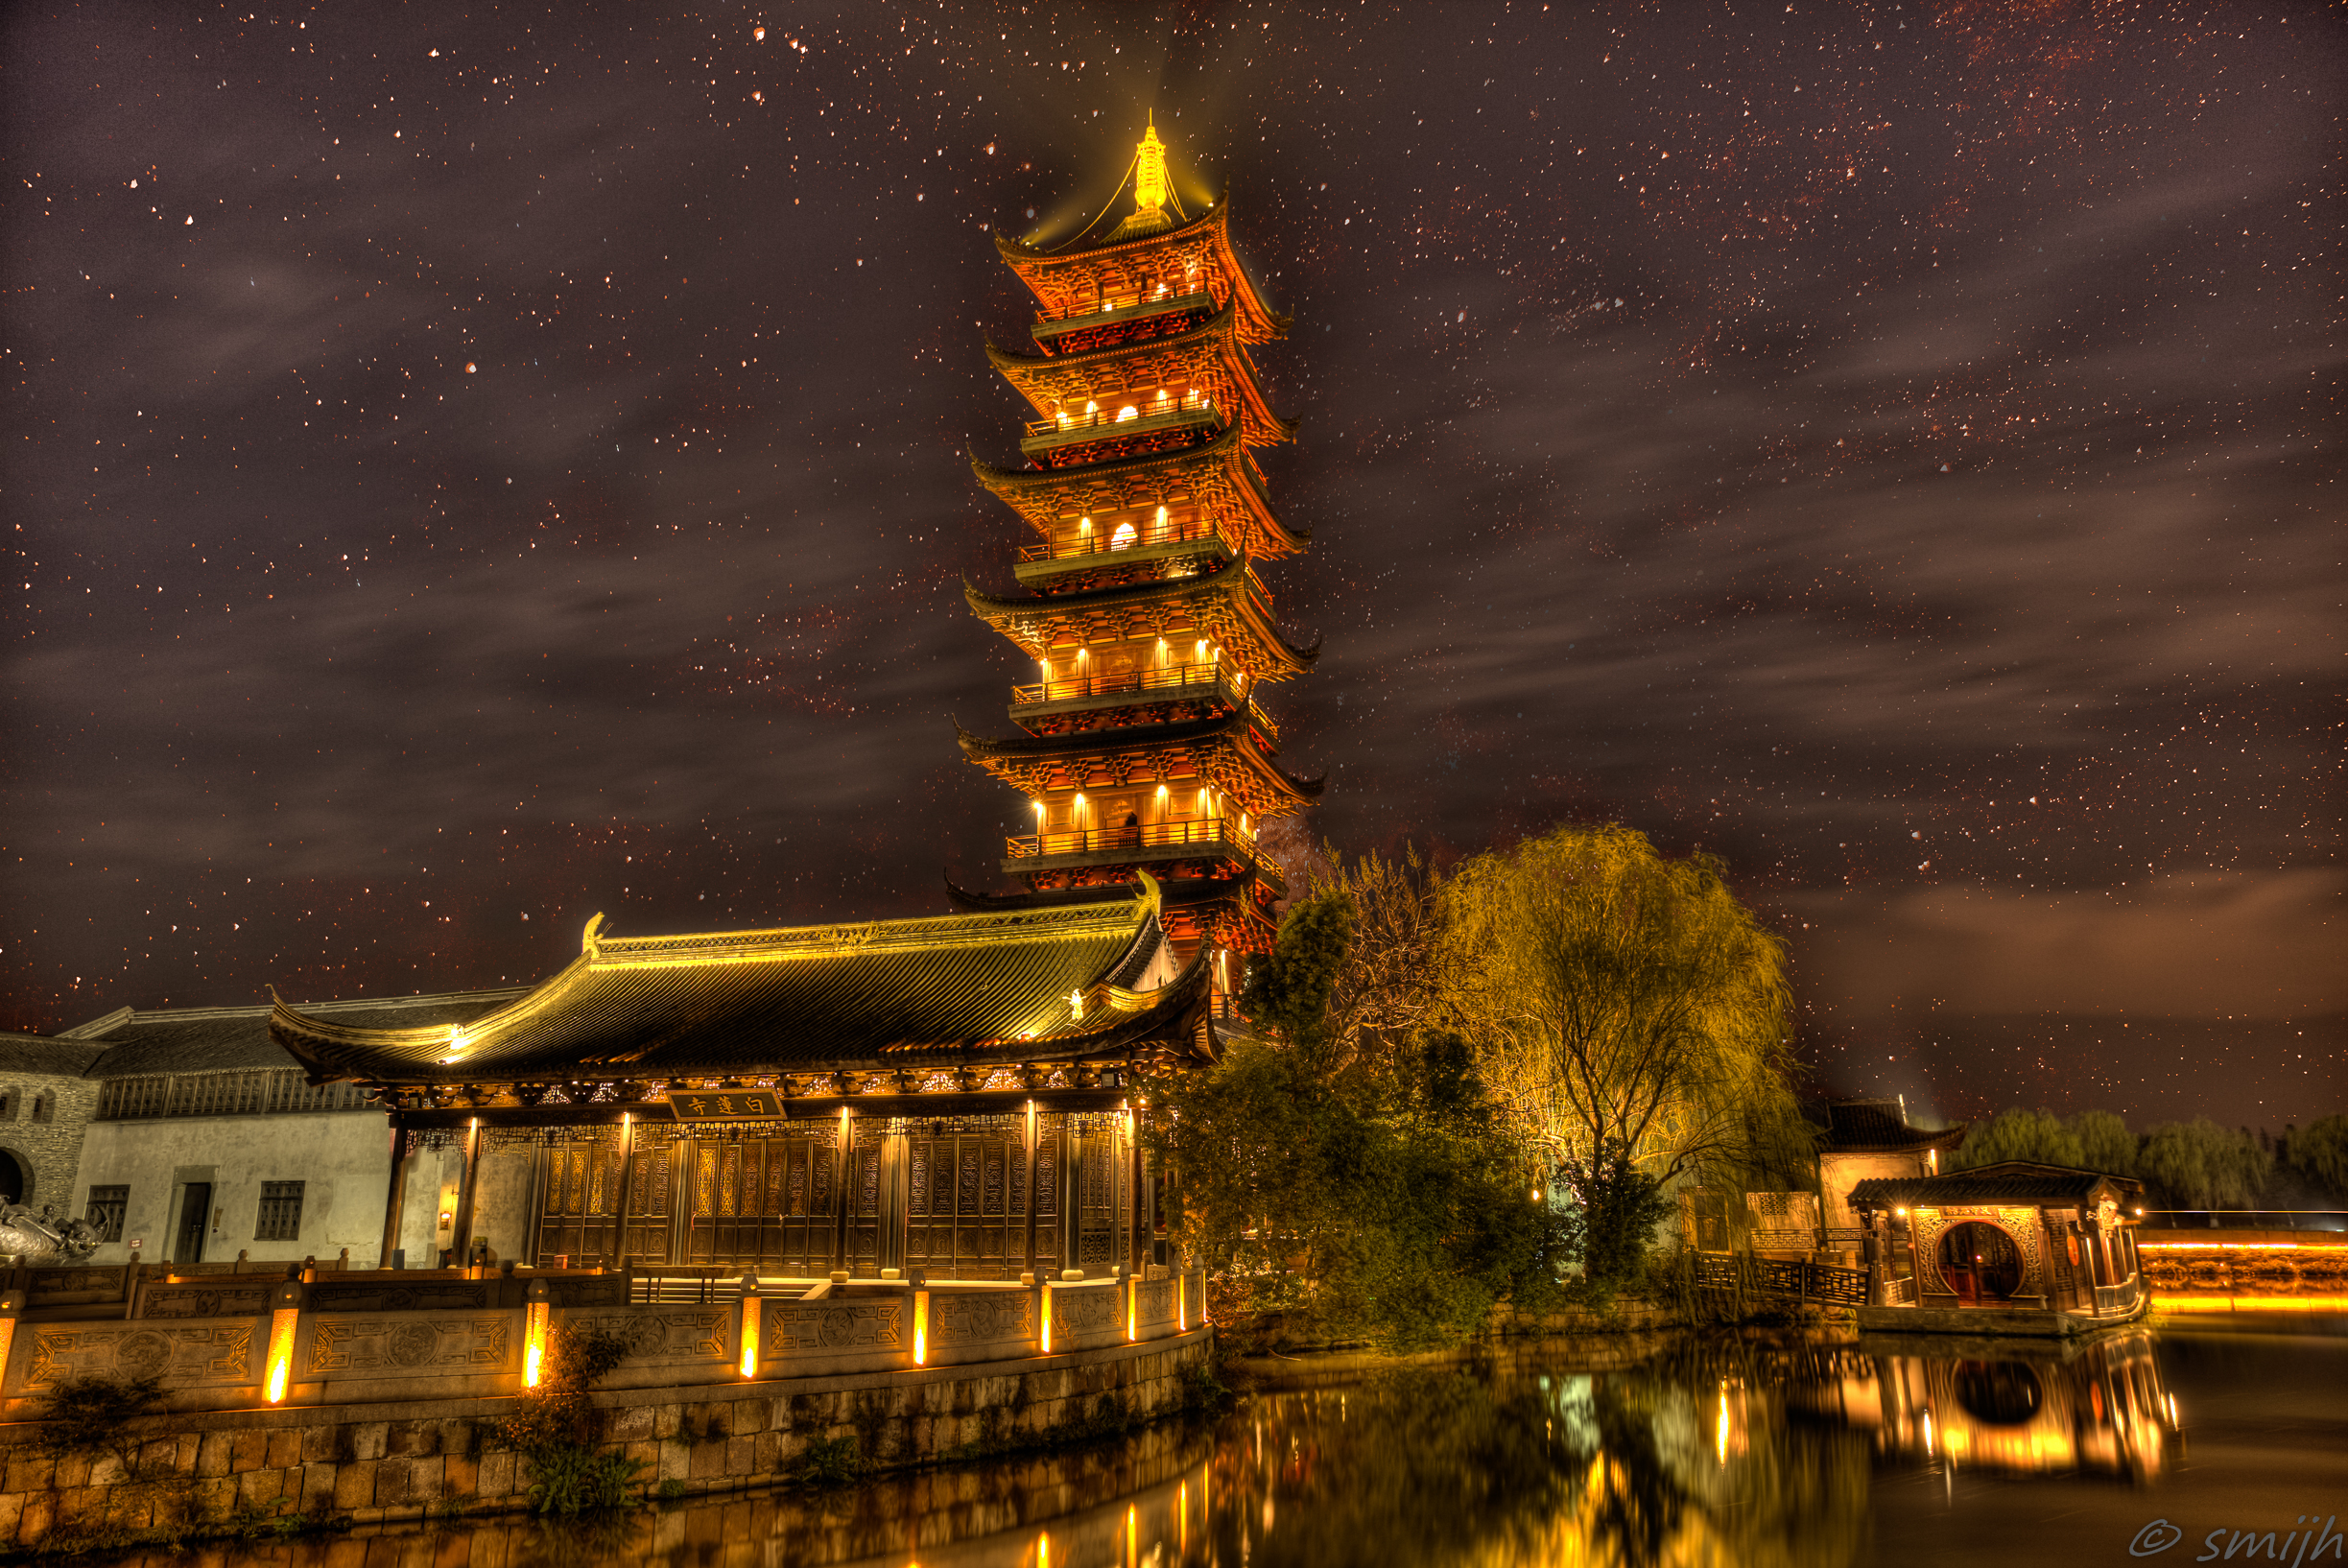 Wallpaper, China, old, white, tower, reflections, pagoda, town, ancient, Asia, village, Lotus, country, Chinese, scenic, east, round, yangtze, middle, wuzhen, HDR, zhejiang, tongxiang 2447x1634